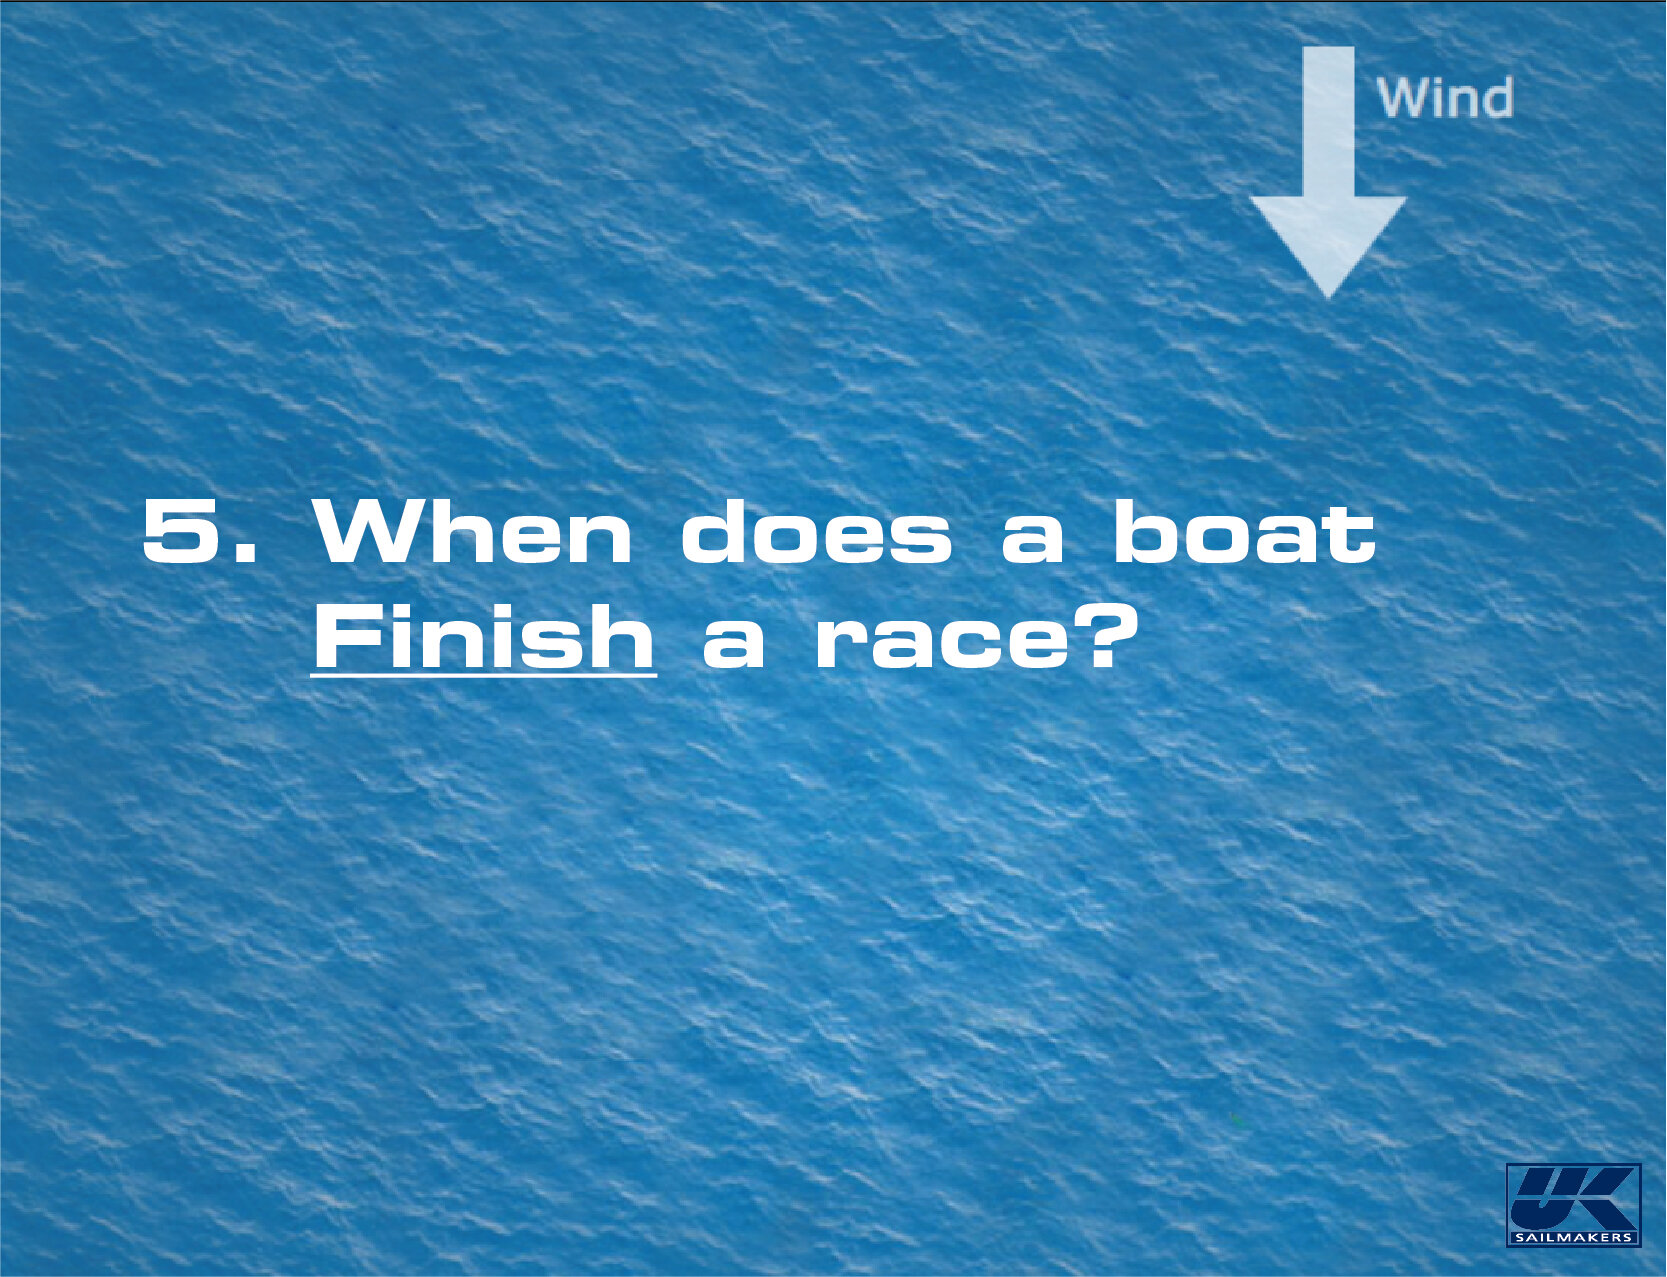 5 When Does a boat finish.jpg